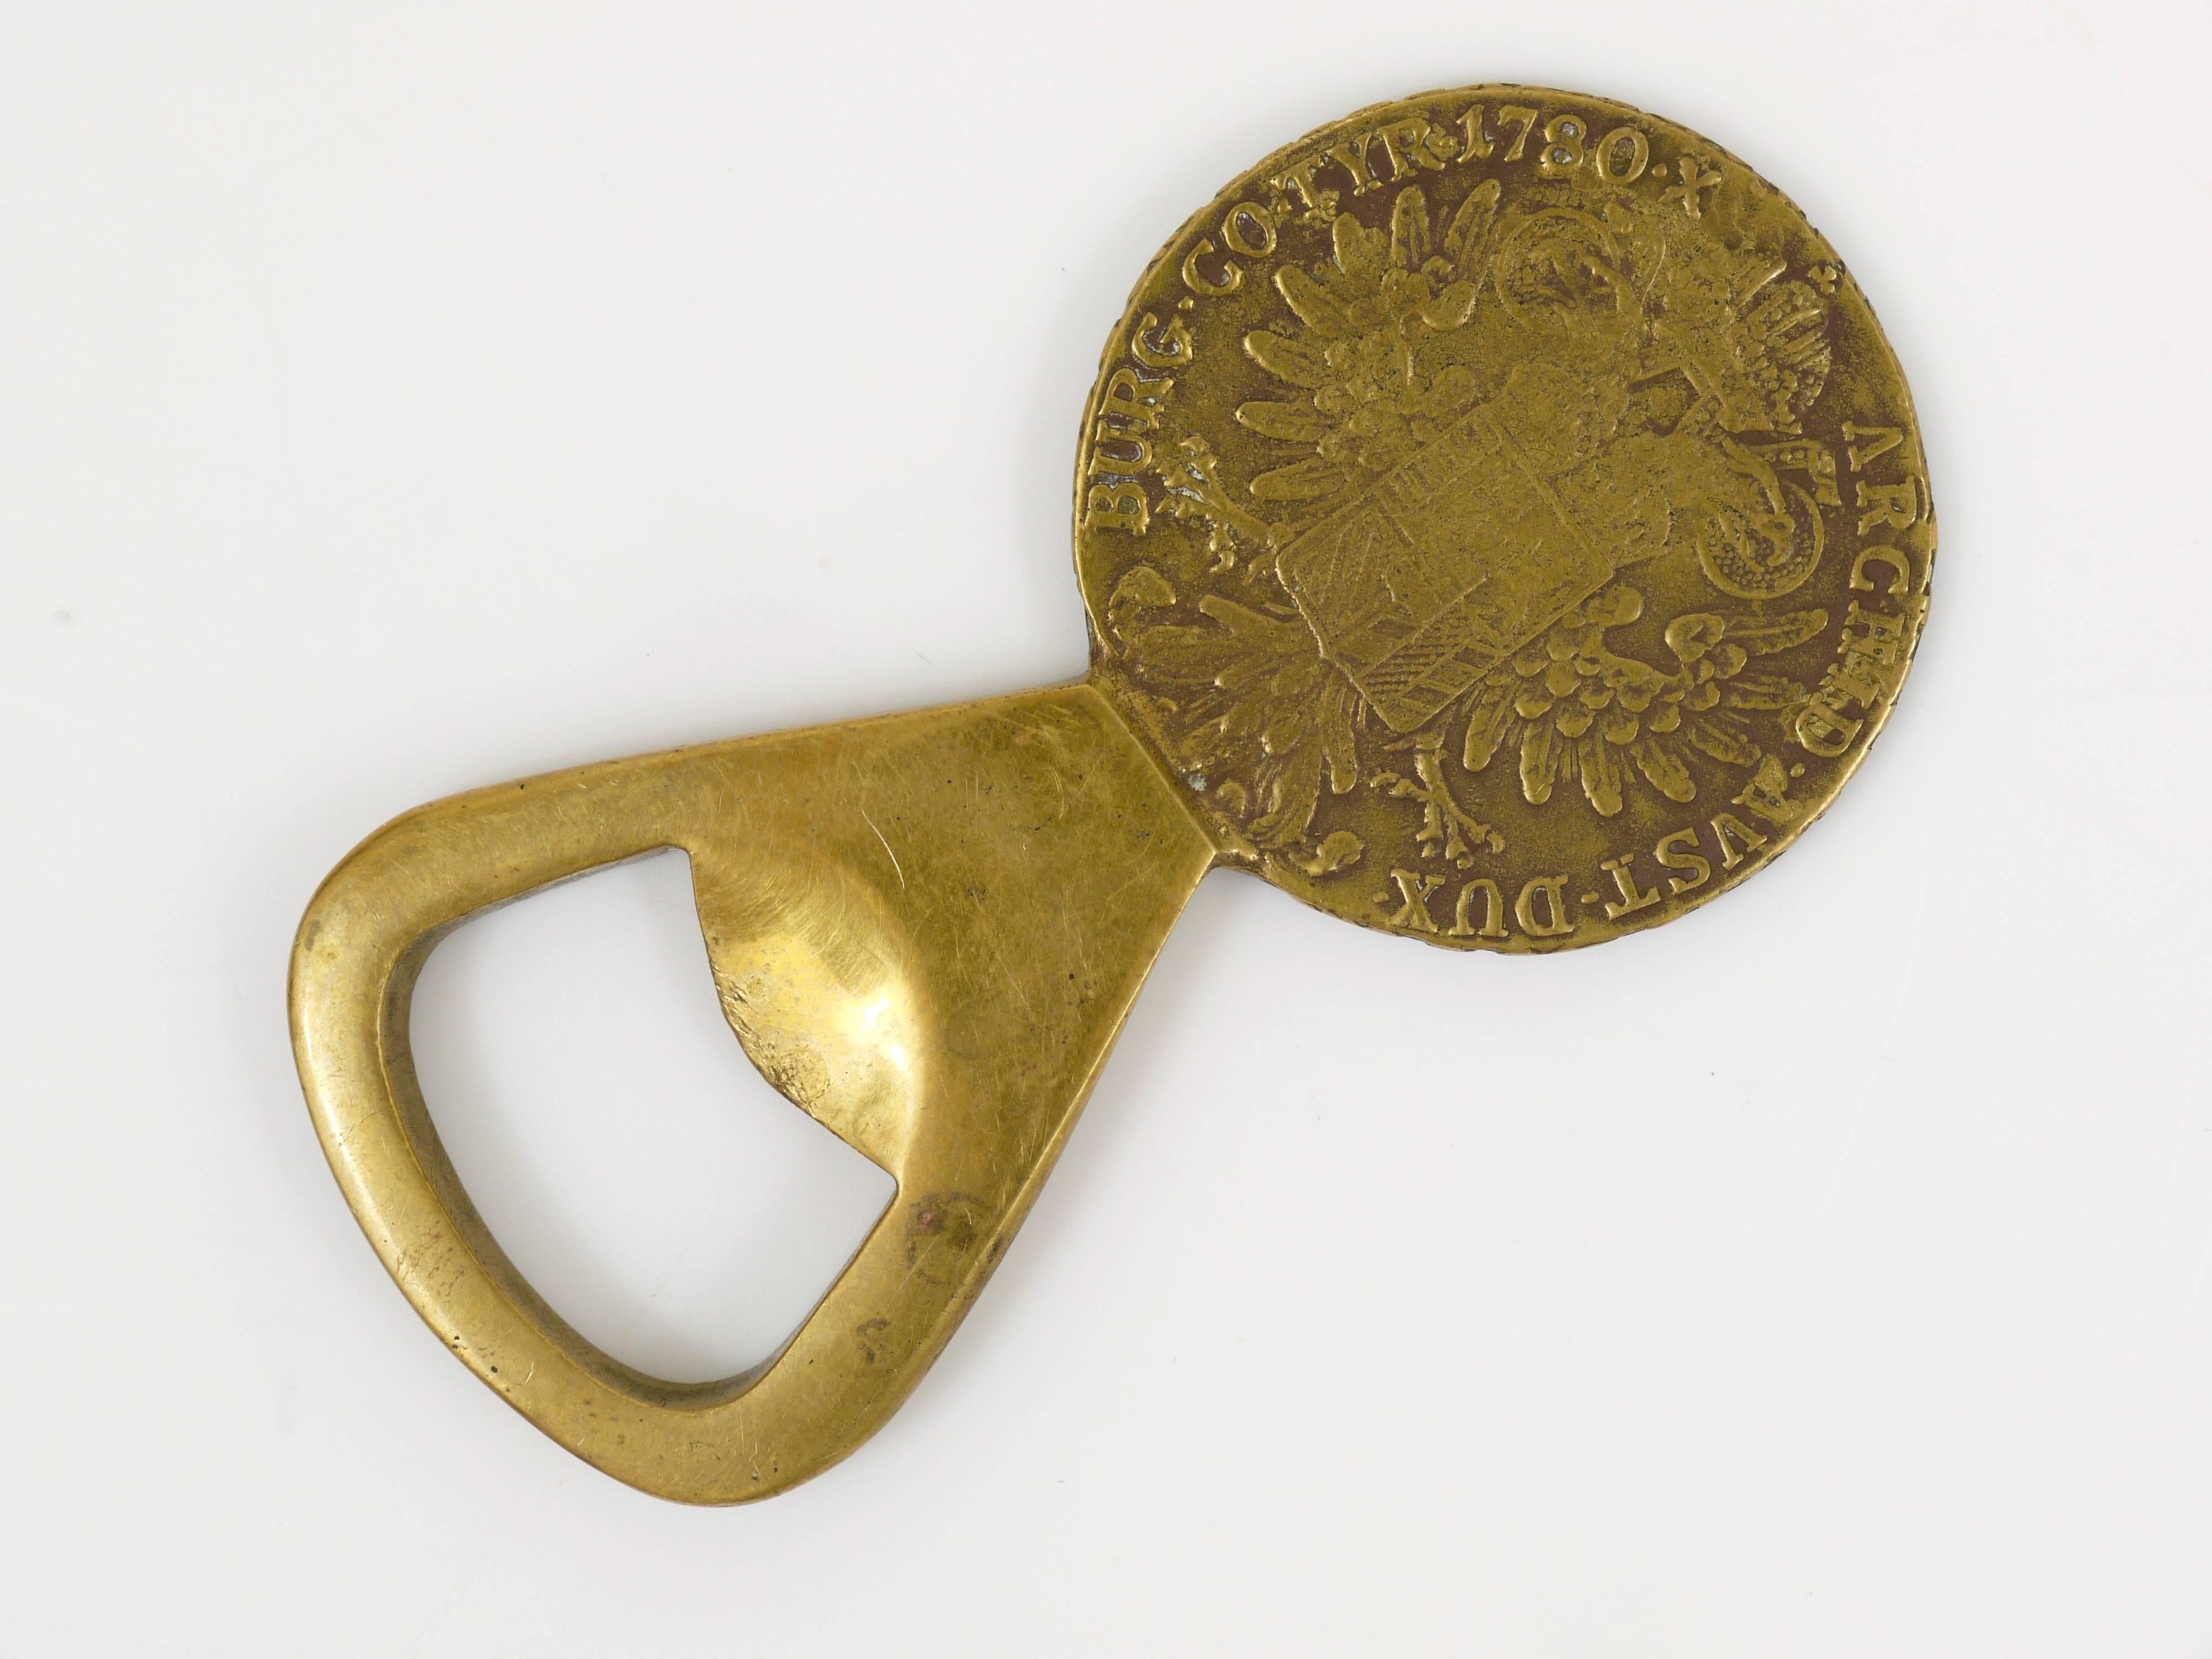 A beautiful brass coin bottle opener, designed and executed by Carl Aubock in the 1950s. In good condition with nice patina. 